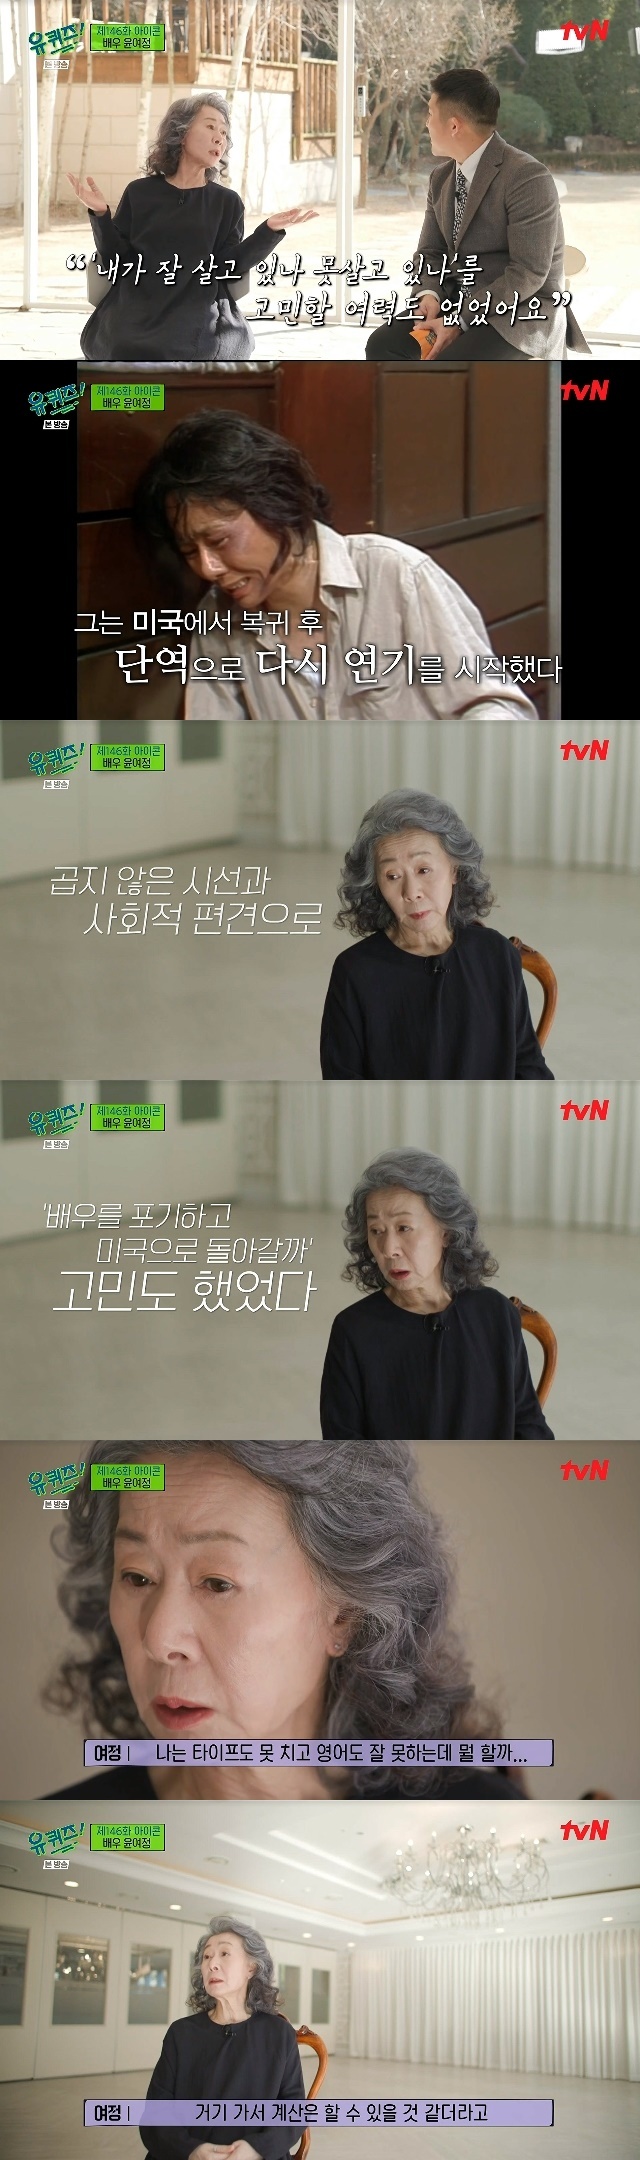 If you know the return and success of Youn Yuh-jung, who was a series of hard times, Cho Young-nam will no longer be able to do Youn Yuh-jung.In the 146th episode of tvN You Quiz on the Block (hereinafter referred to as You Quiz on the Block), which was broadcast on March 23, actress Youn Yuh-jung, who has won an Oscar for her special feature on Icon, which meets the wrinkled children of each field, appeared as a guest.Youn Yuh-jung swept the World Film Festival award last year for her role as the sheer character of the film Minari (director Jung I-sak).He was the first Asian actor to win the United States of America Actors Guild Award for Best Supporting Actress and the British Academy Award for Best Supporting Actress, and won the Oscar at the 93rd United States of America Academy Awards.The friendship between Youn Yuh-jung and Linda Ronstadt was related to the hard past history of Youn Yuh-jung.Youn Yuh-jung, who had gained fame as an actor in the early 1970s when he was a freshman at college, gave up acting at the peak of his career and left for United States of America.It was with singer Cho Young-nam who came to study abroad for theology study.In an interview, Linda Ronstadt, a friend of Youn Yuh-jung, recalled that Youn Yuh-jung studied English while watching drama and had difficulty raising her first child because she could not read her parents education book, which led to her guessing the difficulties she had experienced while adapting to the United States of America.Youn Yuh-jung was the only Korean in the neighborhood from 1975 to 1984 and resided in United States of America.Youn Yuh-jung said: My big boy (son) is 75 years old, so I would have gone before that, then I throw a passport at the airport immigration office when I go abroad.I dont know (Korean), she recalled, and since then, my heart has been beating and I was sweating because I was afraid I wouldnt let him in.It was such a difficultly adapted United States of America life, but in 1985, in his 40s, Youn Yuh-jung returned to Korea and began acting from the minor role.Youn Yuh-jung said, Do you have to go back to United States of America and just raise and live here? Its like a time when it was too hard.I did not have the ability to worry about whether I was living well or not. It was the hardest time in Youn Yuh-jungs life, with no one looking for actor Youn Yuh-jung.Youn Yuh-jung said, Even if the station comes out, Youn Yuh-jung was famous. Why do not you ask her to come out once?I tried to call him, but he said I was coming out. I needed work. So I did my part. Yet Youn Yuh-jung also wondered if he would return to United States of America for unfavorable gaze and social prejudice.Youn Yuh-jung said, Would you take the kids back to United States of America, when the house was still there?I dont pay to go to high school if I send it to the national school. So what I can do is I cant type and speak English.There was a supermarket chain called Purplex. I thought I could do the math. So I recognized Linda Ronstadt.The job says the wage is $2.75 an hour. Ill go and do it. Ill take the kids.I did, but Kim Soo-hyun said that he was crazy when he had a talent. Where is Jeju? You have a talent.You just dont get mine. Kim Soo-hyun was a great writer then. I heard my bag when it came out.You have to find it on your own. But the actors job. No one wrote it. Kim Soo-hyun wrote me. Very burdened.But what do you do, I had to make money. So Youn Yuh-jung appeared in many works of Kim Soo-hyun, including Love and Ambition in 1987, and became a popular actor again.When asked about what he had gained and lost in his career as an actor, Youn Yuh-jung said, (What I got) is just a false name, that he became famous.Its a real bubble, I got it. I got it. He said, There will be nothing lost.I decided to act. I have no regrets and nothing I have lost. Meanwhile, Youn Yuh-jung, who was 76 years old in Korea in 1947, made his debut as a TBC 3 bond talent in 1966.In the early 1970s, he married singer Cho Young-nam and lived in United States of America. He had two sons, but he was hit by Cho Young-nams affair.